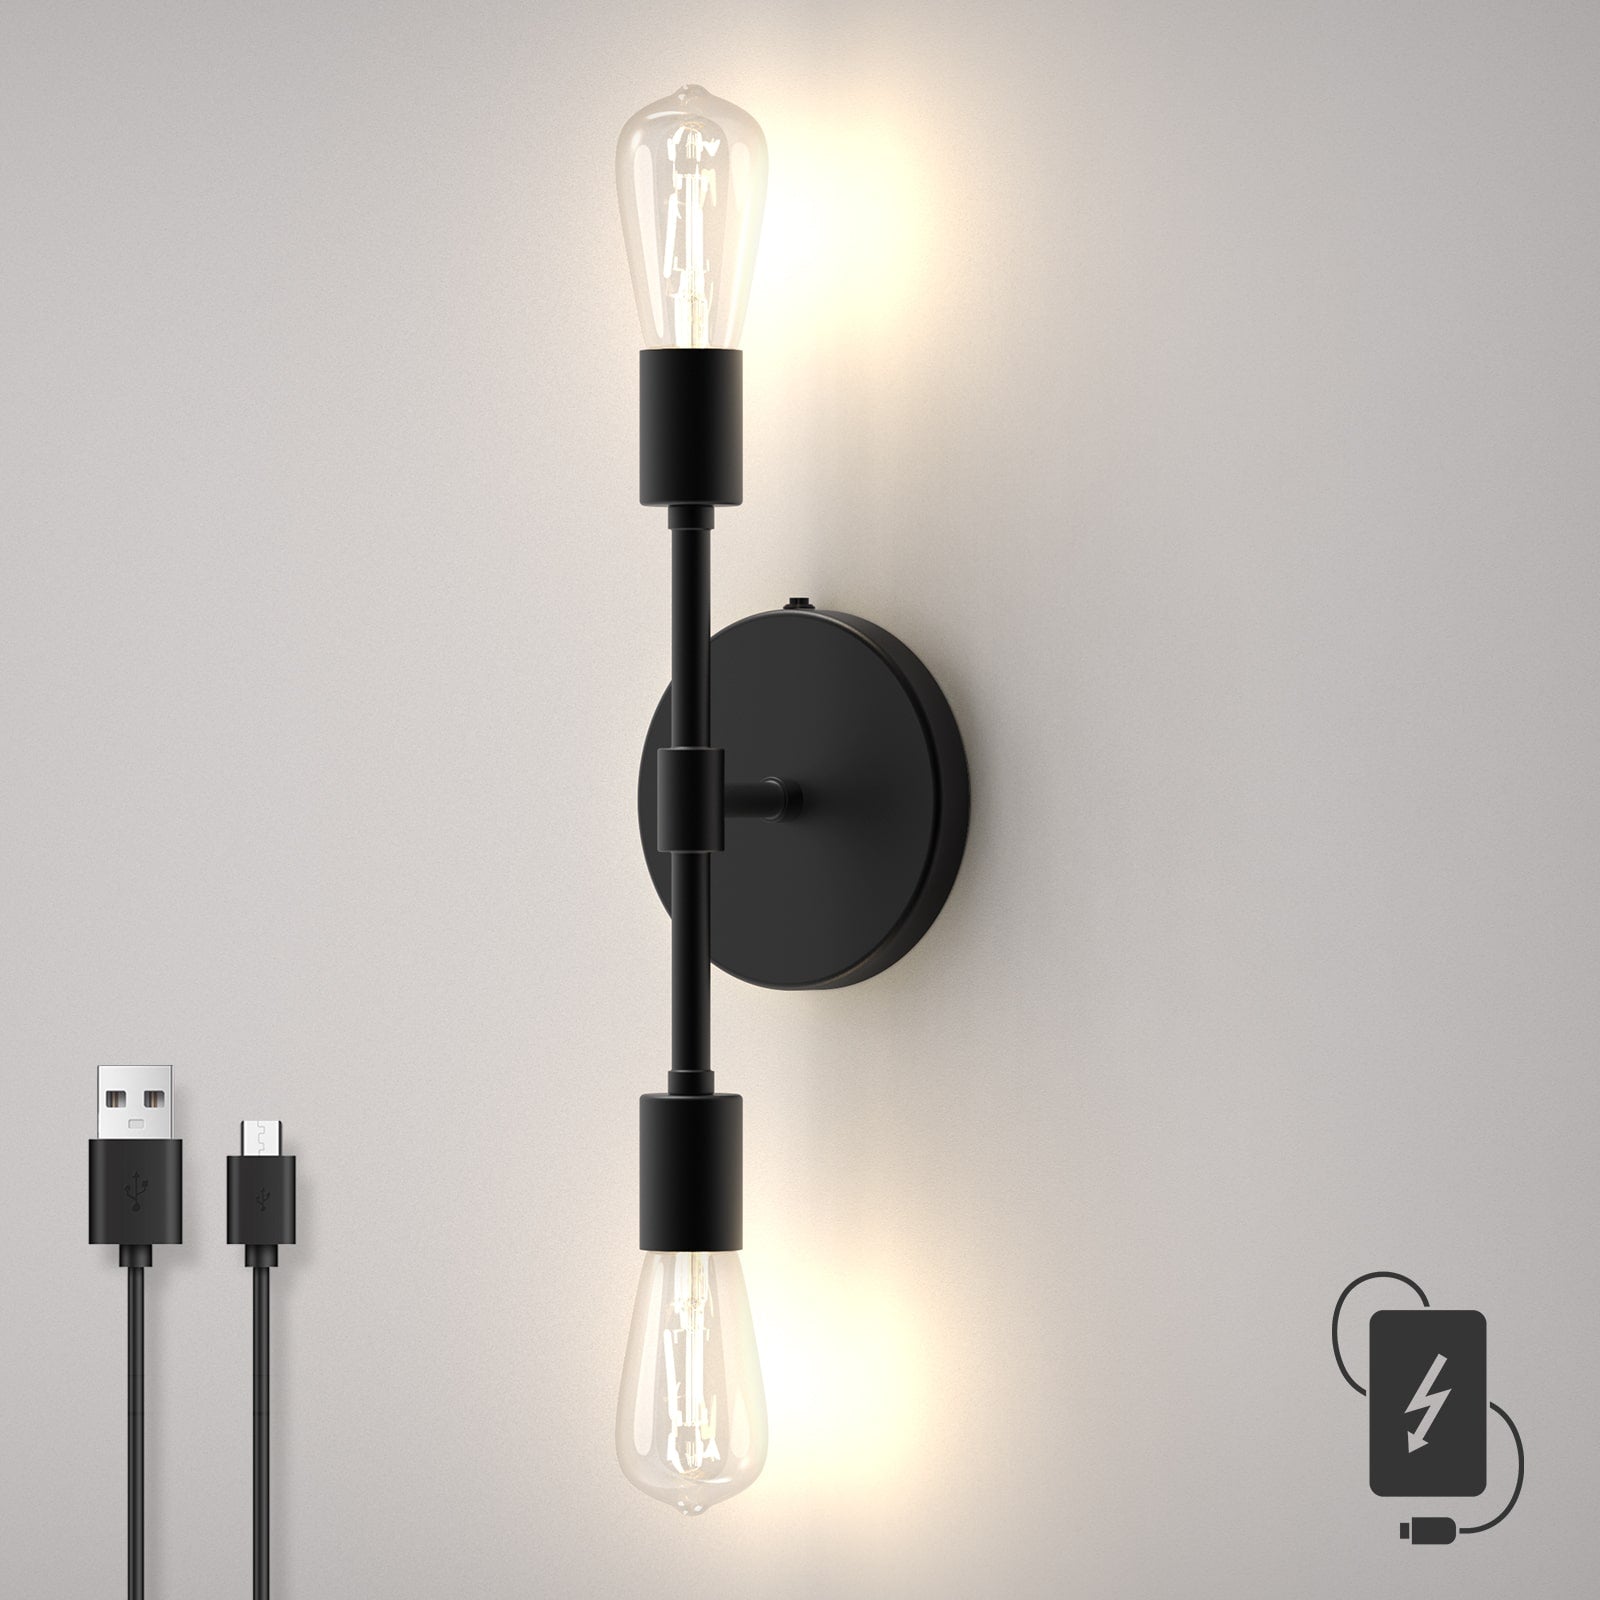 C05 2-Lights Wireless Battery Operated Wall Lamp for Hallway